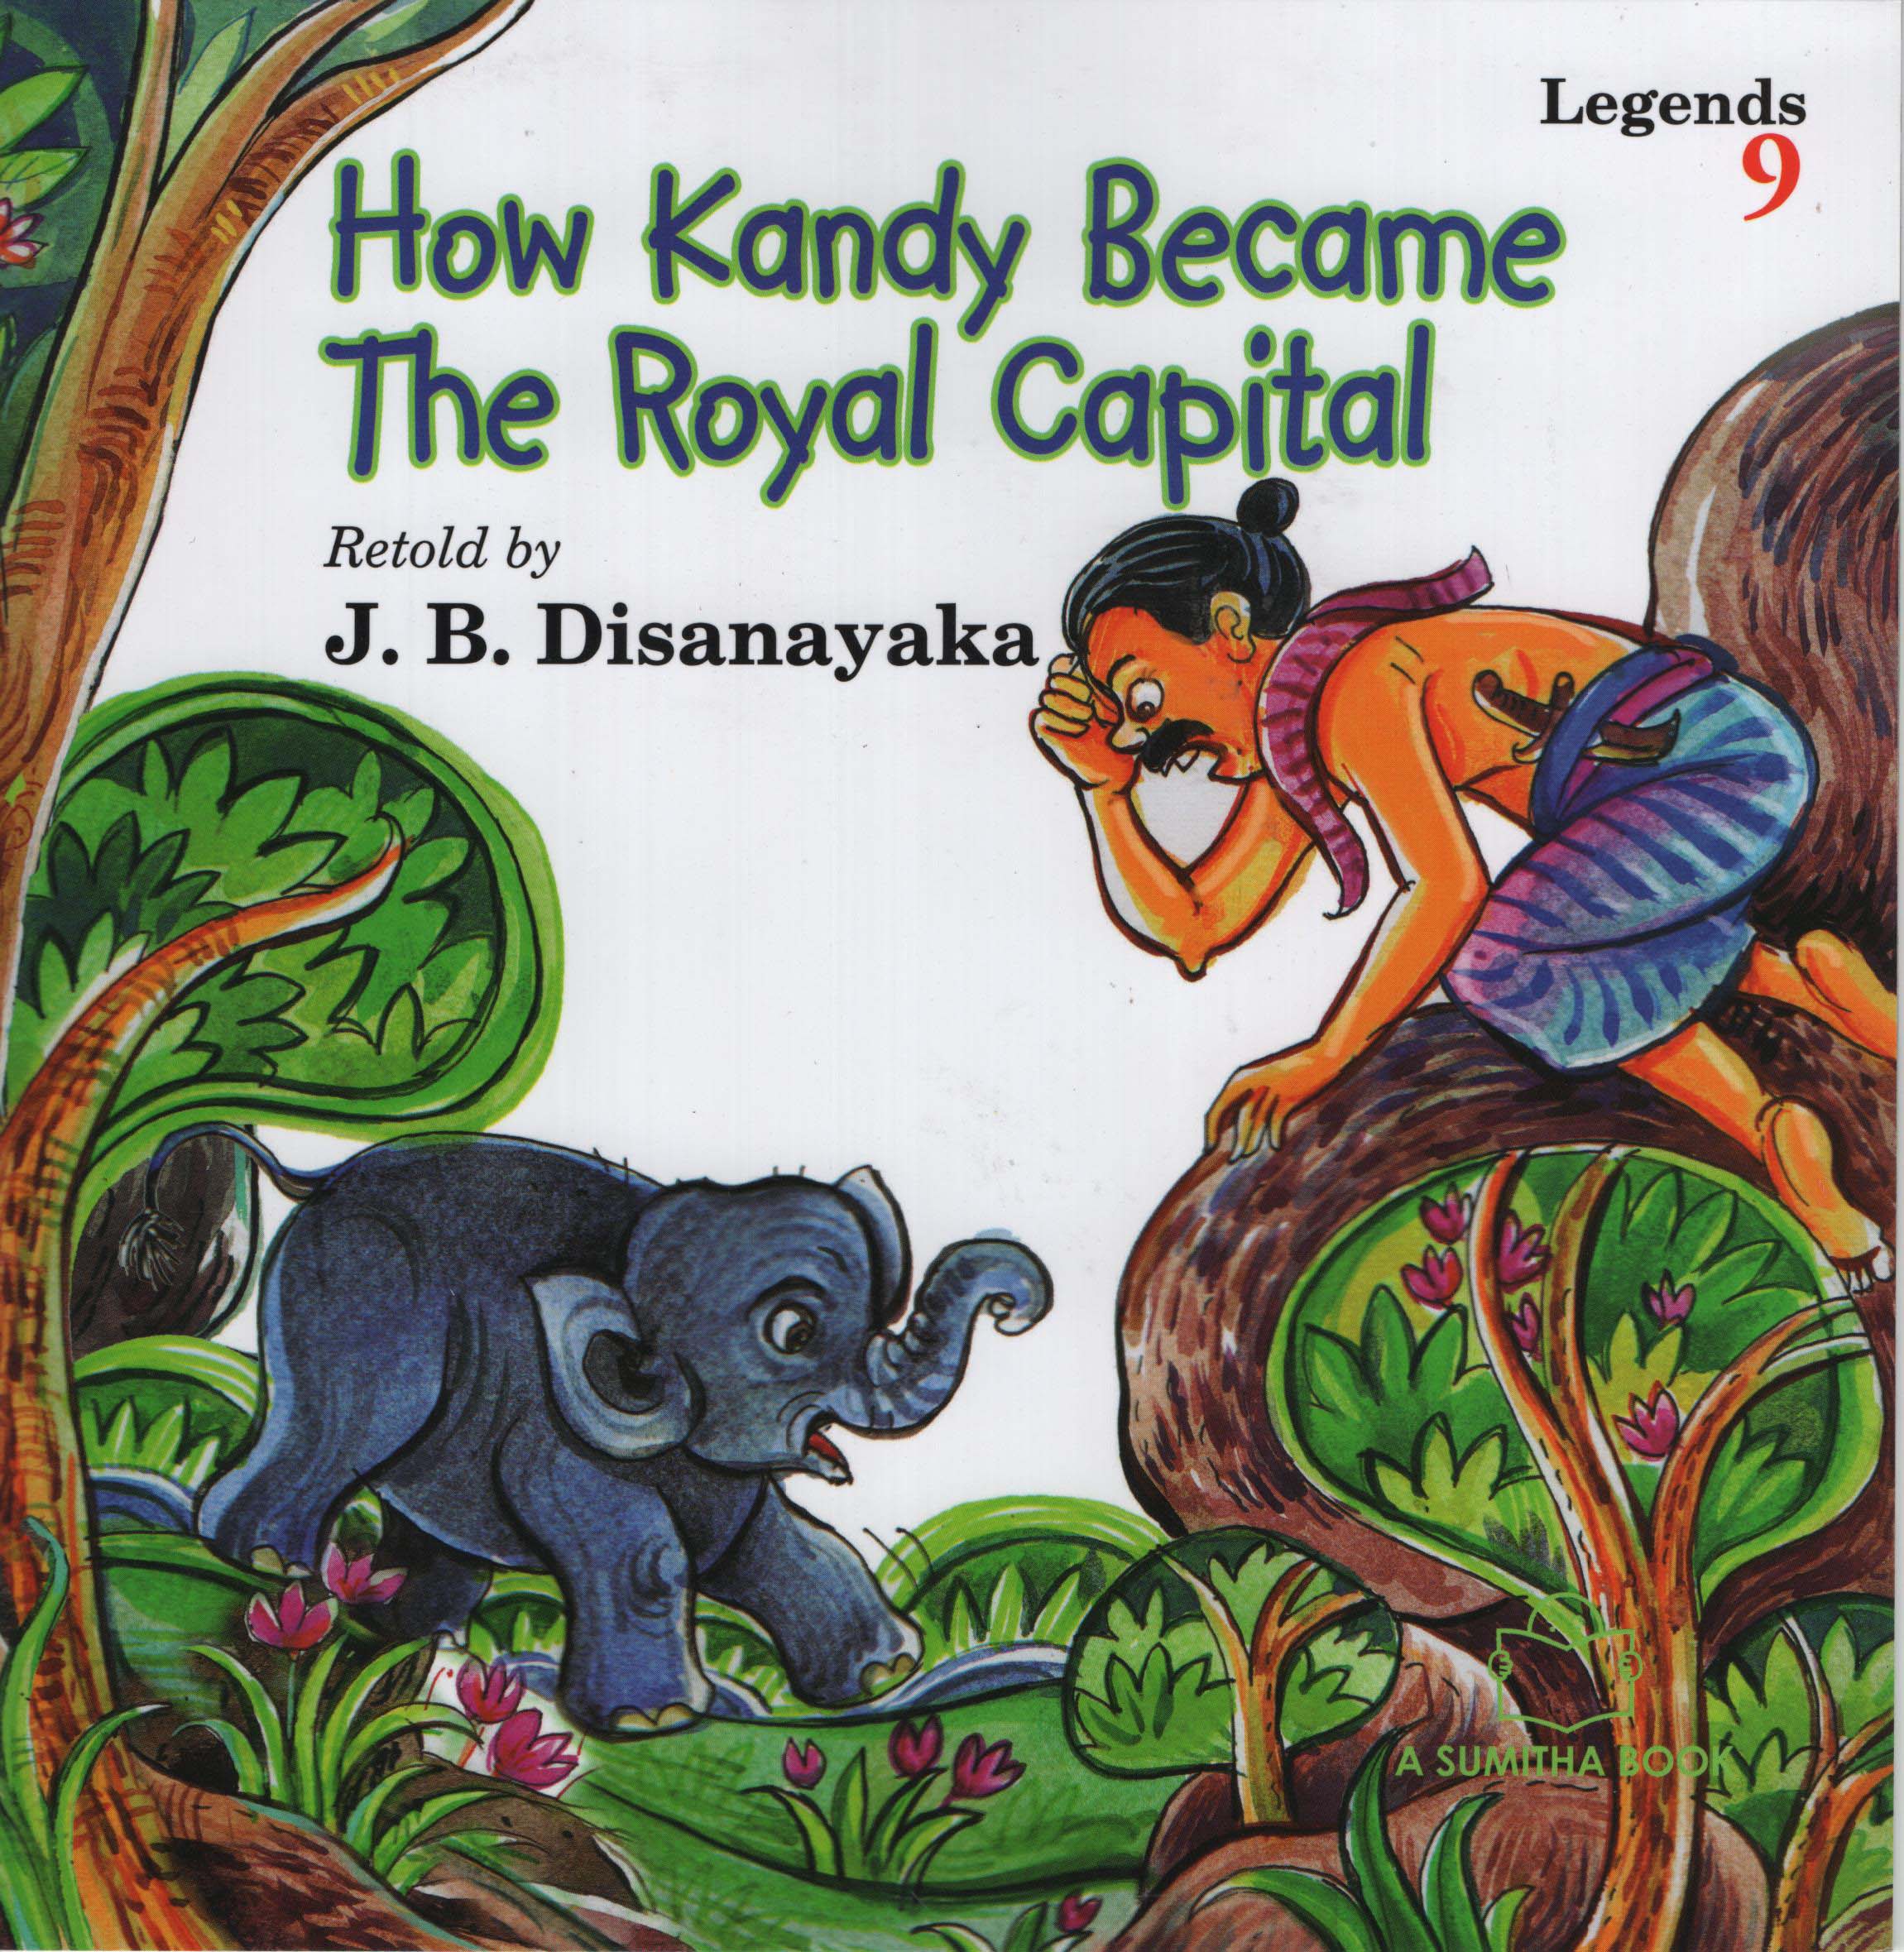 Legends 9 How Kandy Became The Royal Capital 